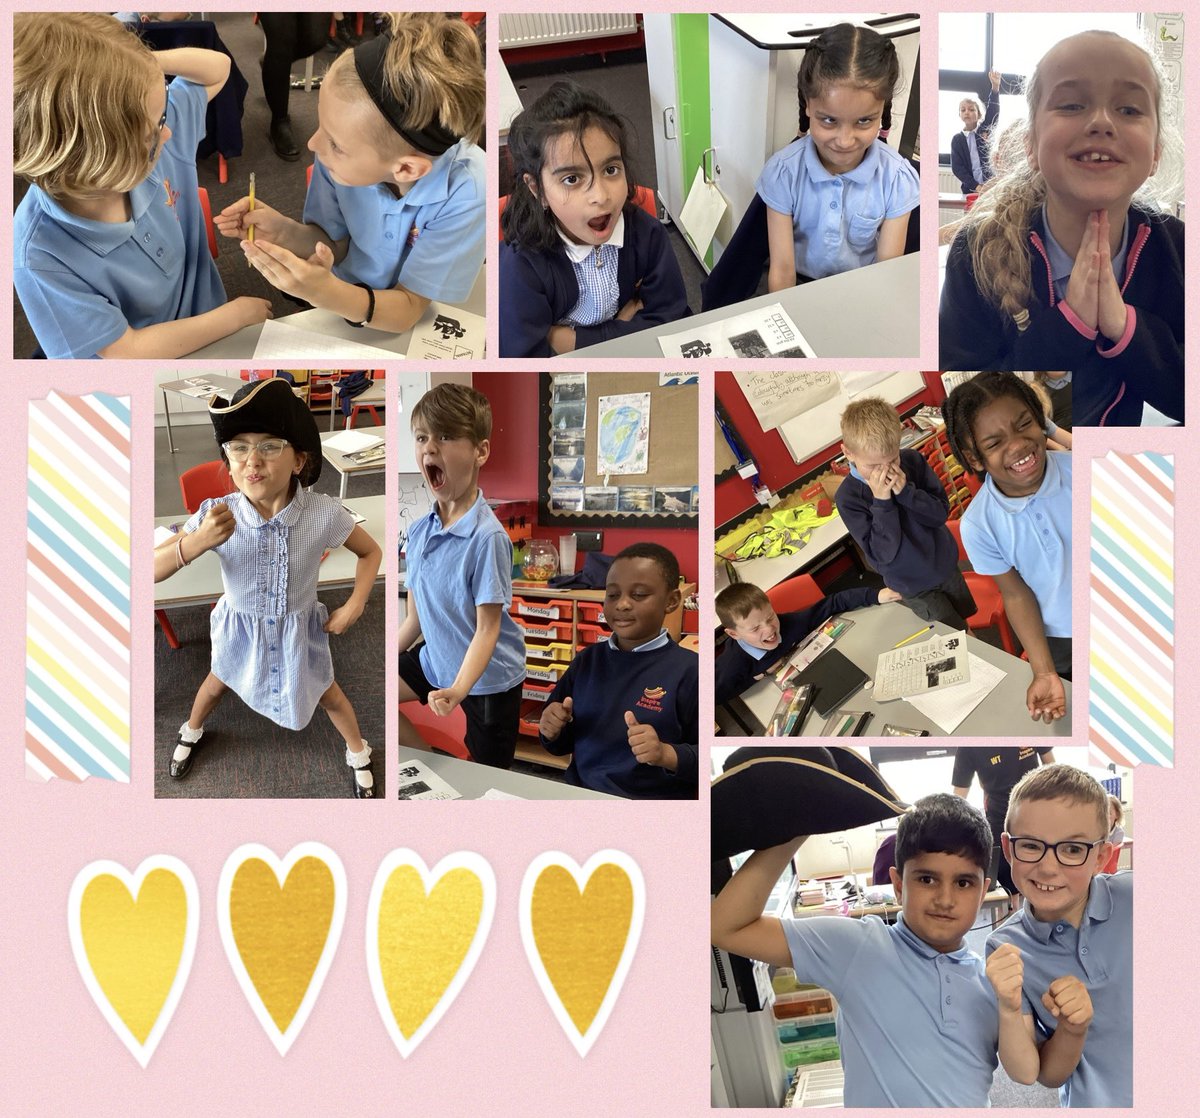 😍😂 So much drama and so many emotions when Y3A played the pirate game in Maths on Friday! I’m proud to say the atmosphere was wonderful and the arithmetic was very impressive! 😂😍 @Inspire_Ashton @TrustVictorious @Inspire_Maths1